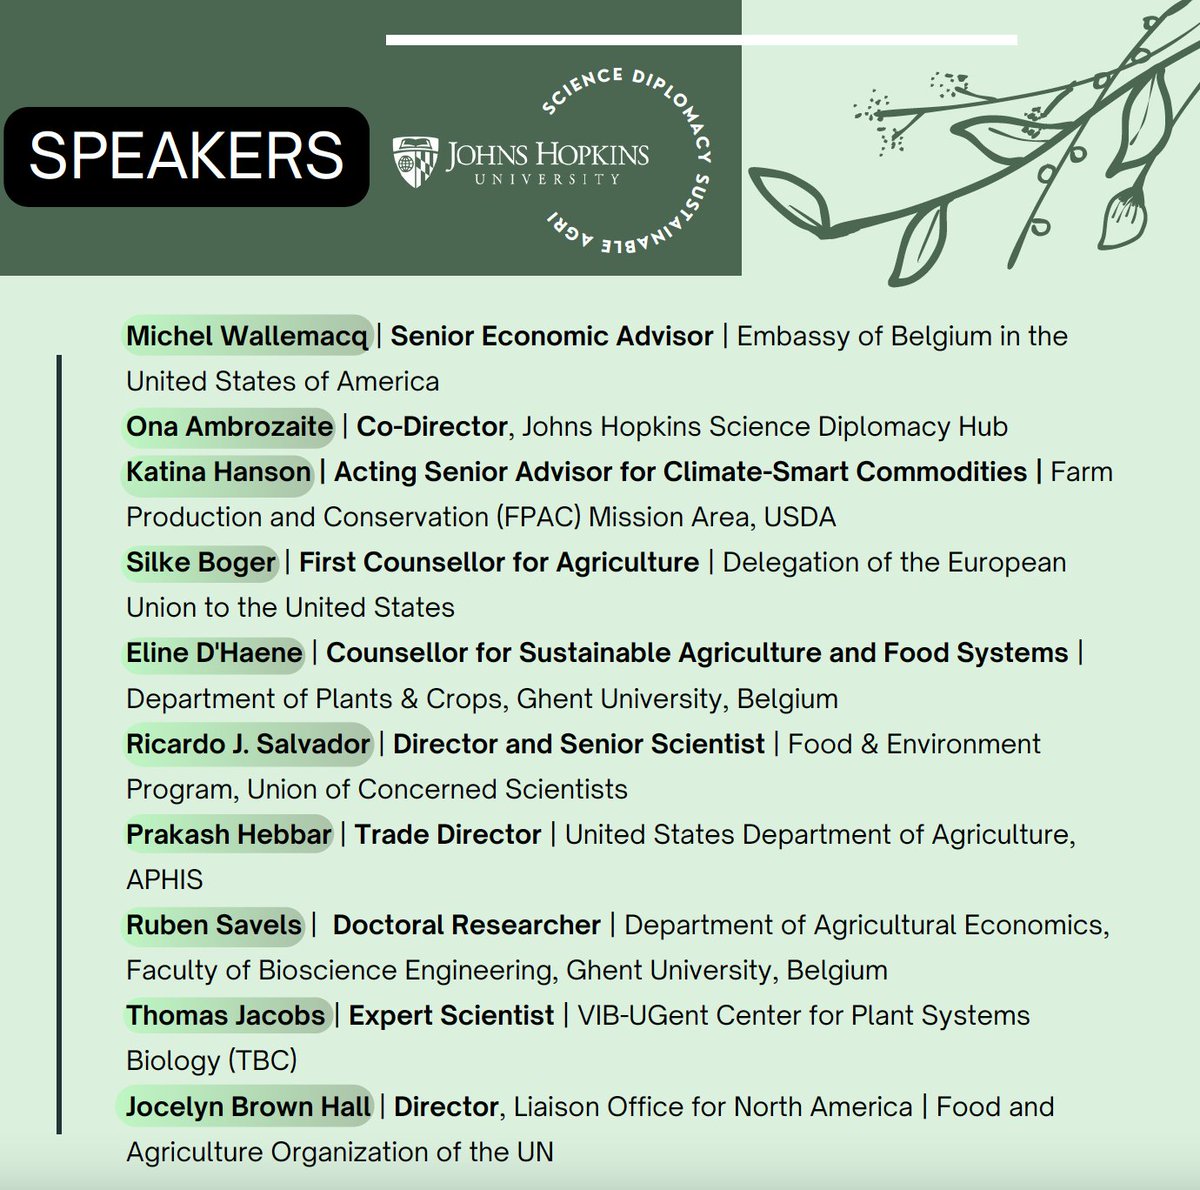 Join #HopkinsBloombergCenter, @BelgiumintheUSA & @ugent for 'Belgium and U.S. Perspectives on Sustainable Agriculture | Science Diplomacy for Sustainability,' Tues, June 4. @JohnsHopkinsSPH Hear from speakers addressing sustainability efforts. Register: bit.ly/3UXIYE3